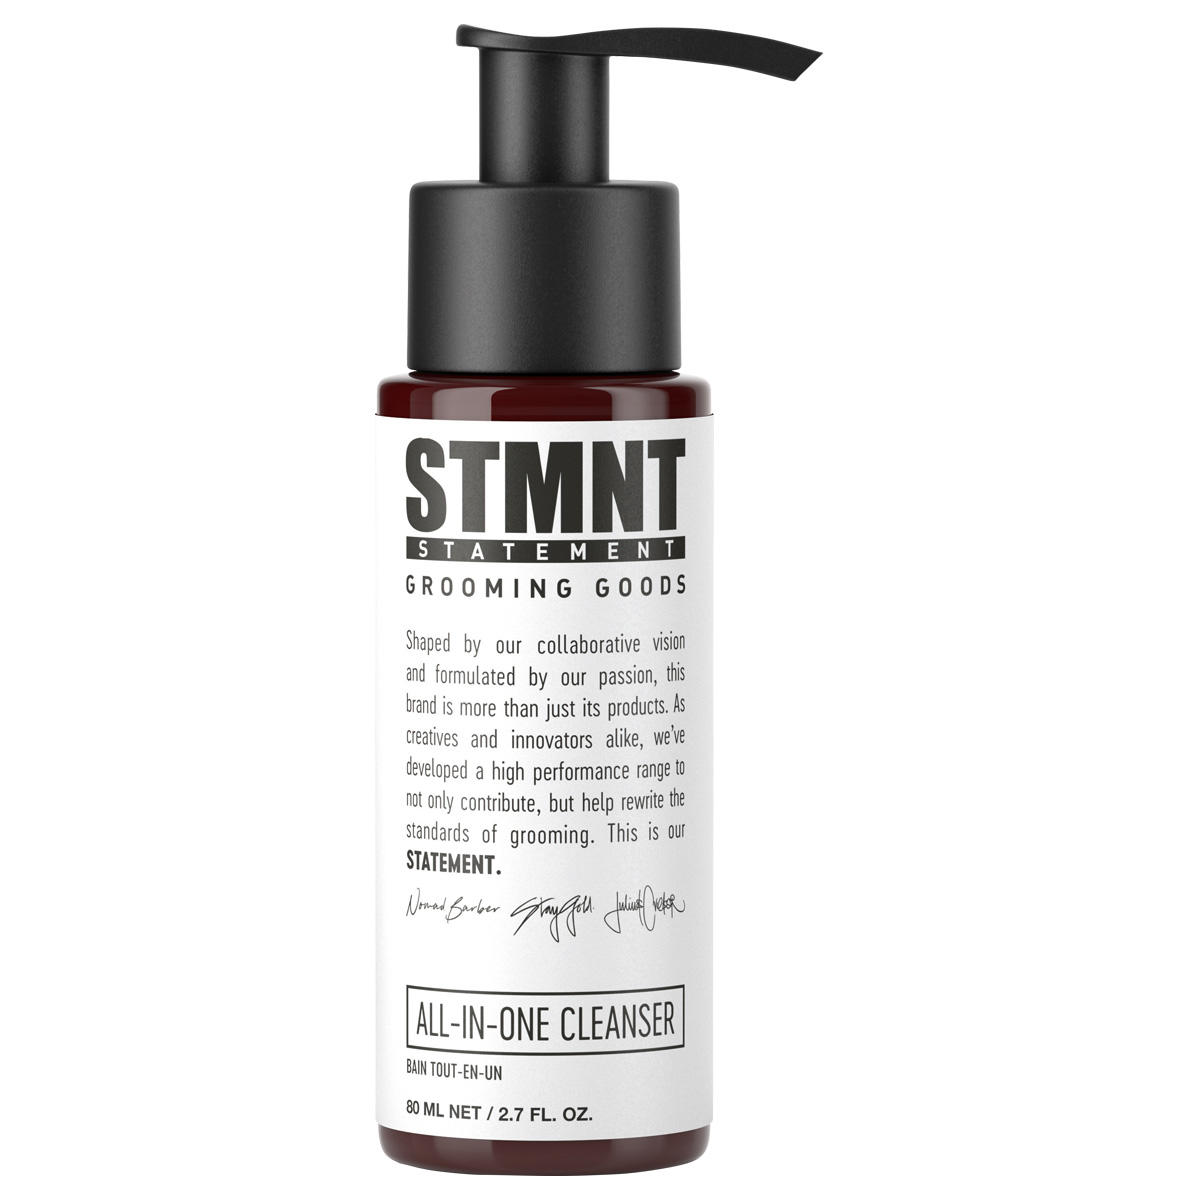 STMNT All-In-One Cleanser 80 ml